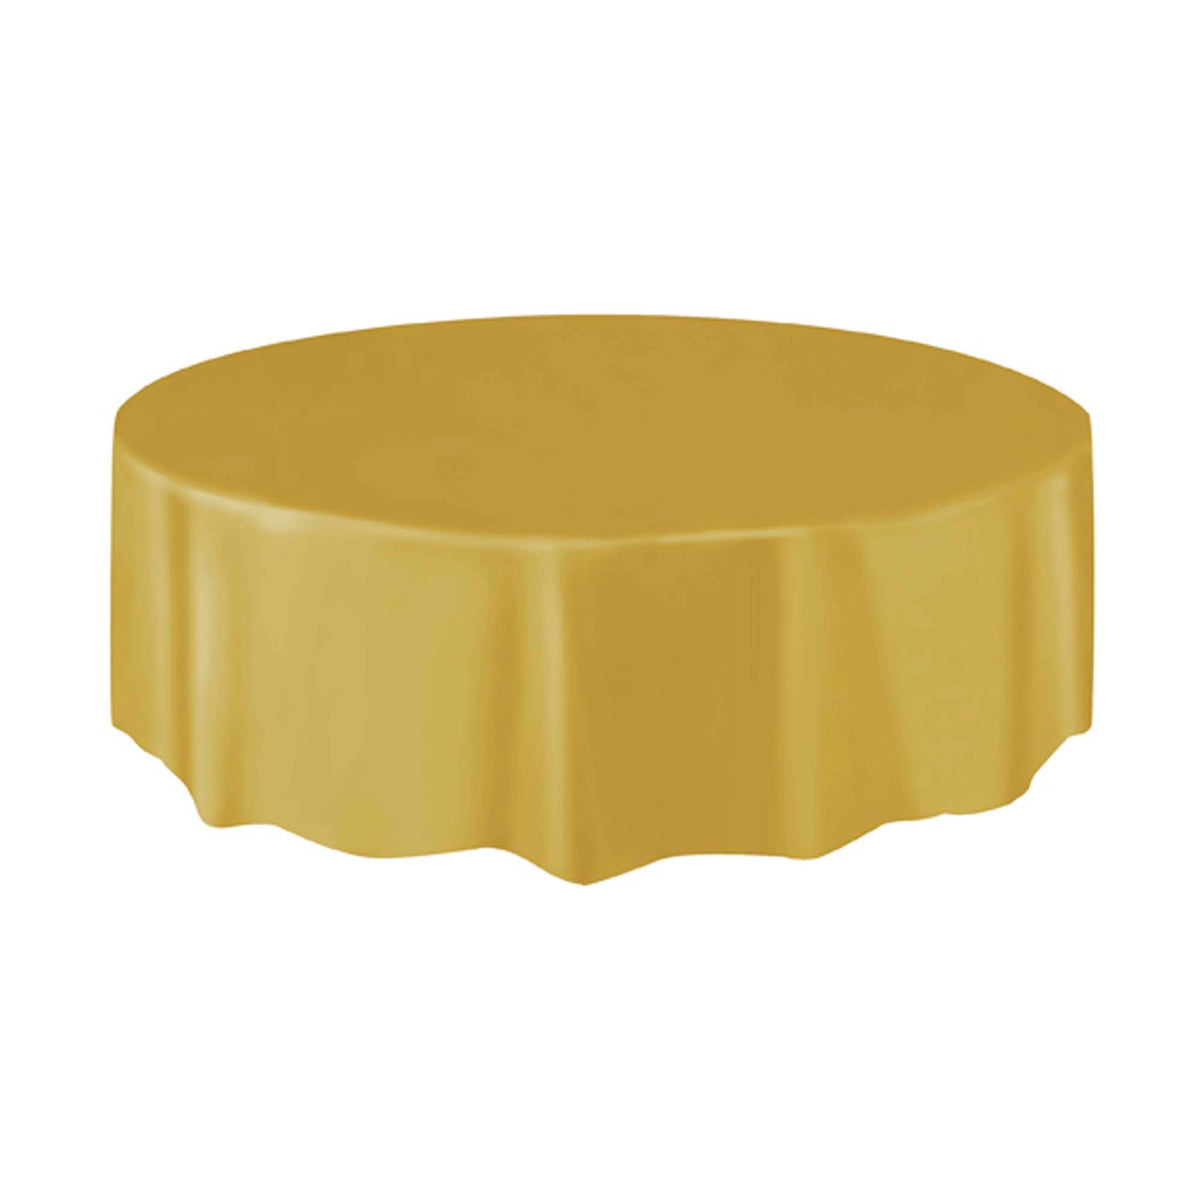 UNIQUE PARTY FAVORS Disposable-Plasticware Gold Round Plastic Tablecover, 84 Inches, 1 Count 011179500352